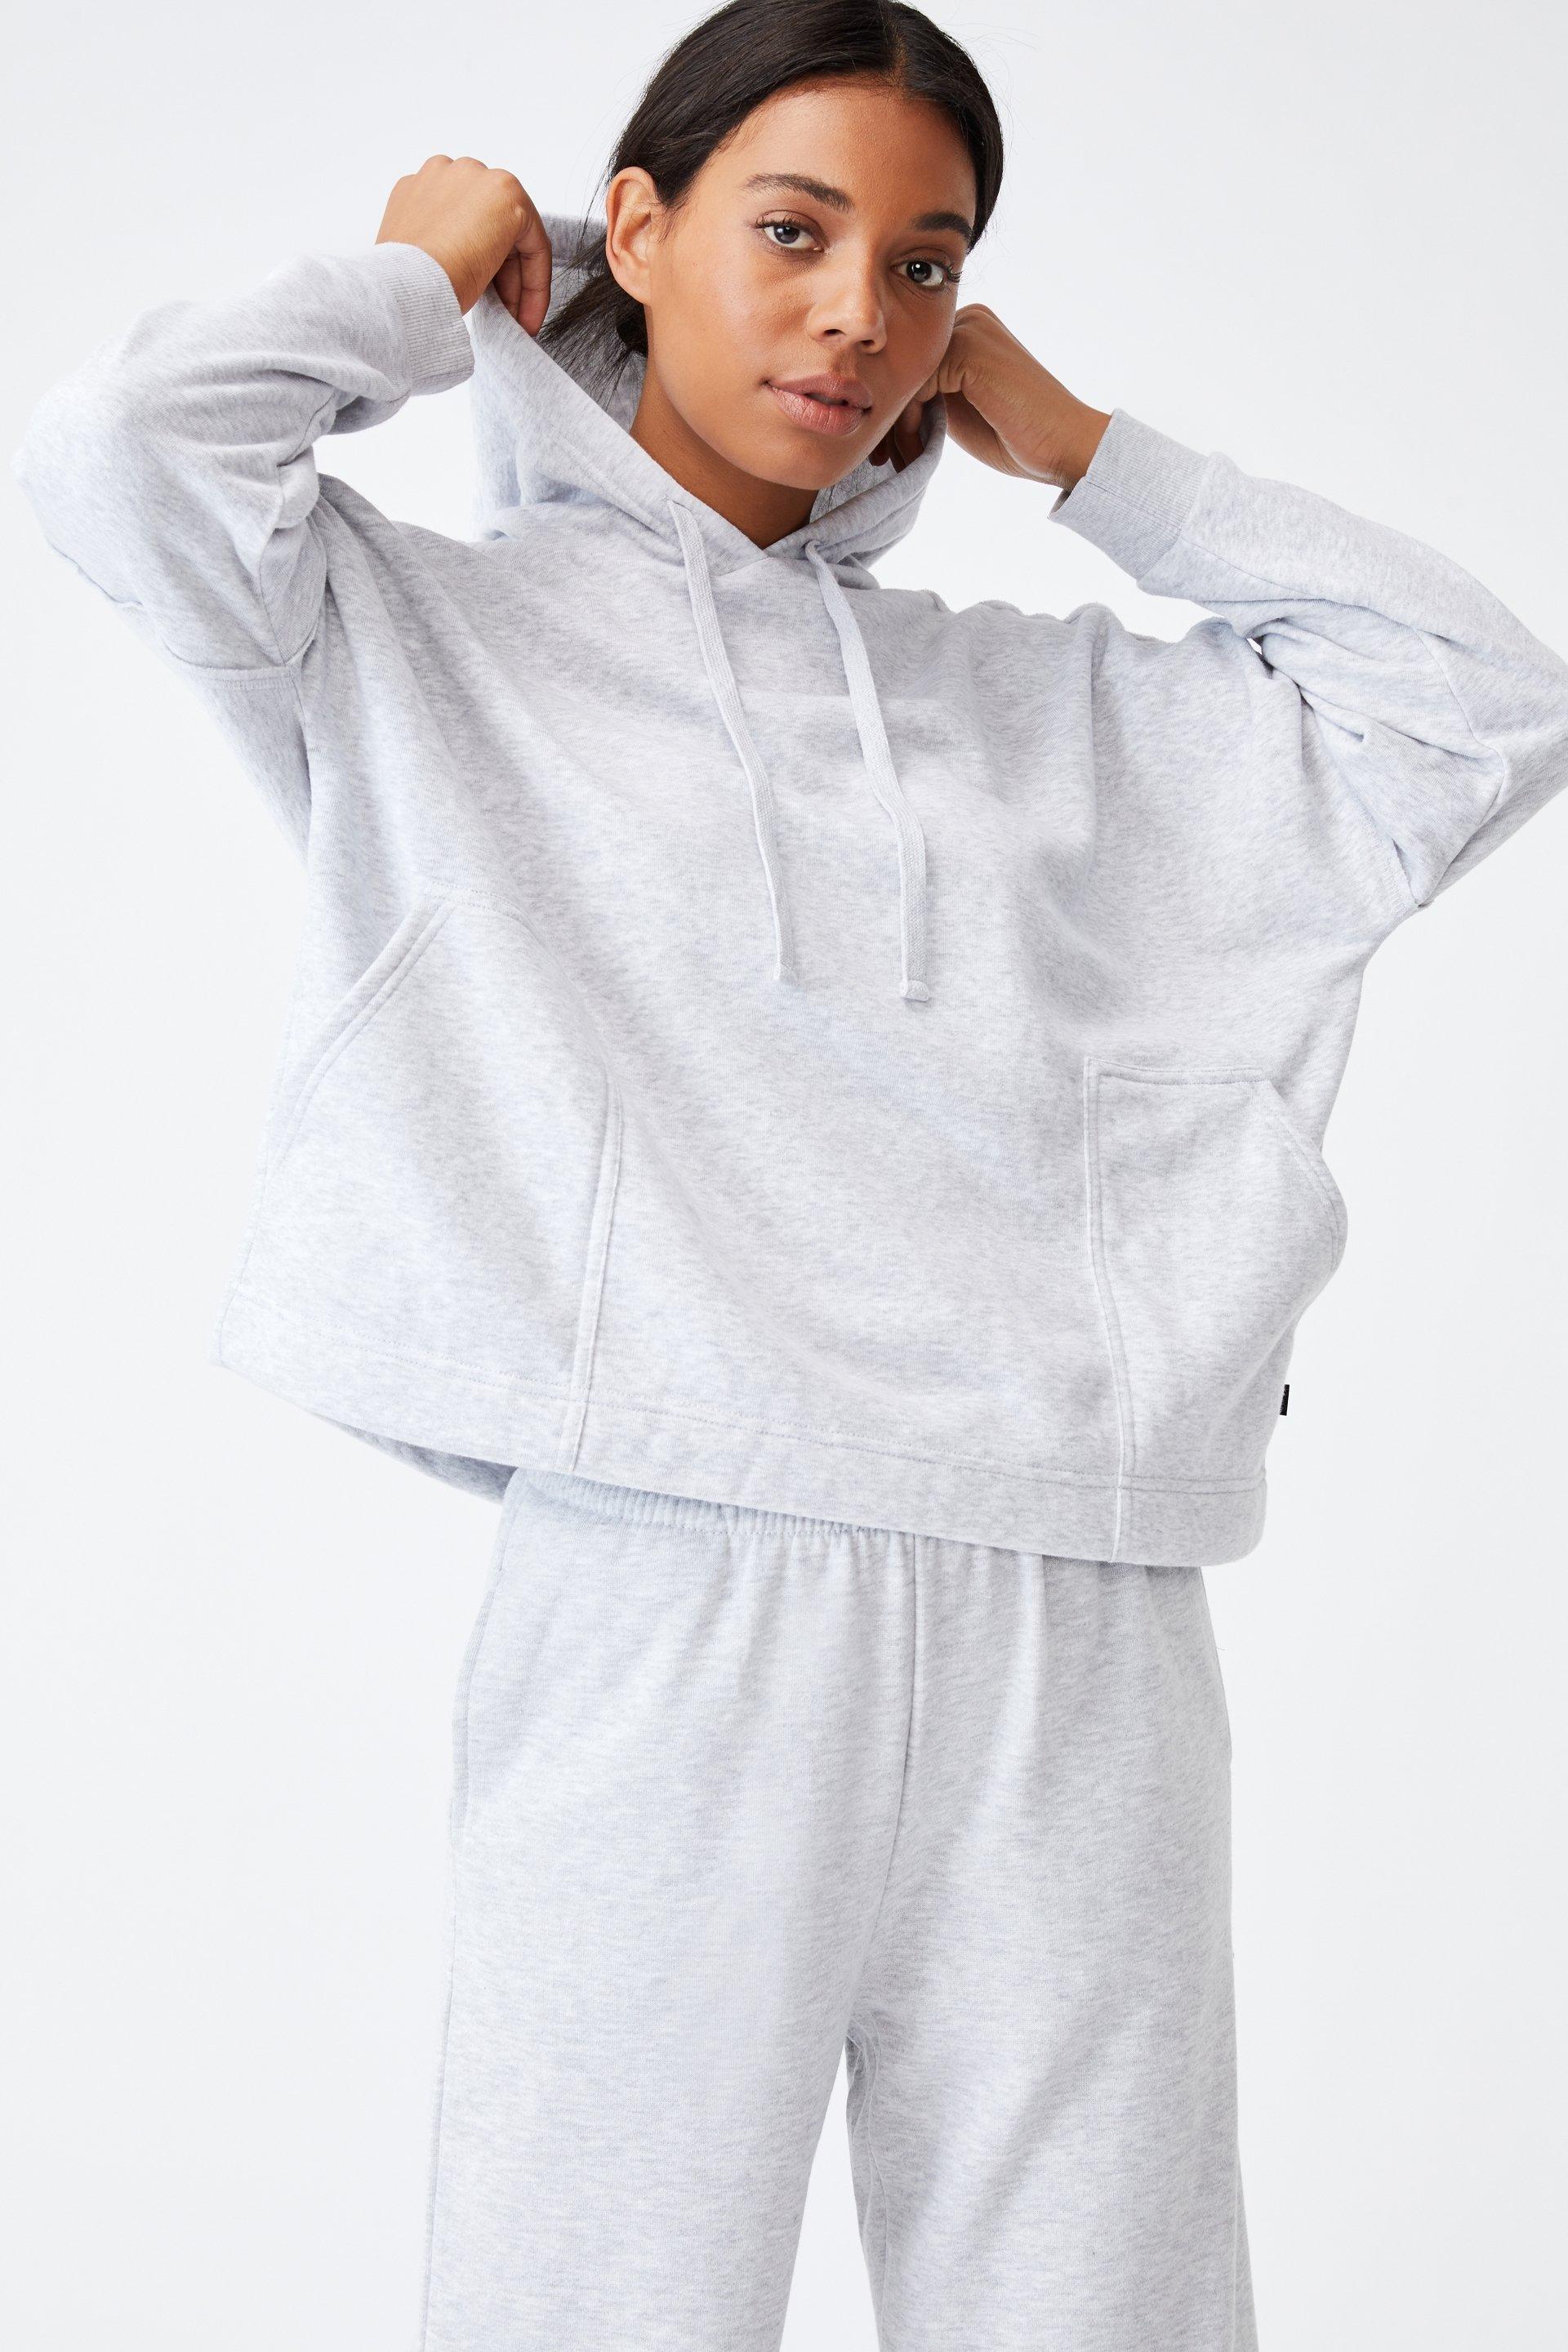 Lifestyle relaxed hoodie - grey marle Cotton On Hoodies, Sweats ...